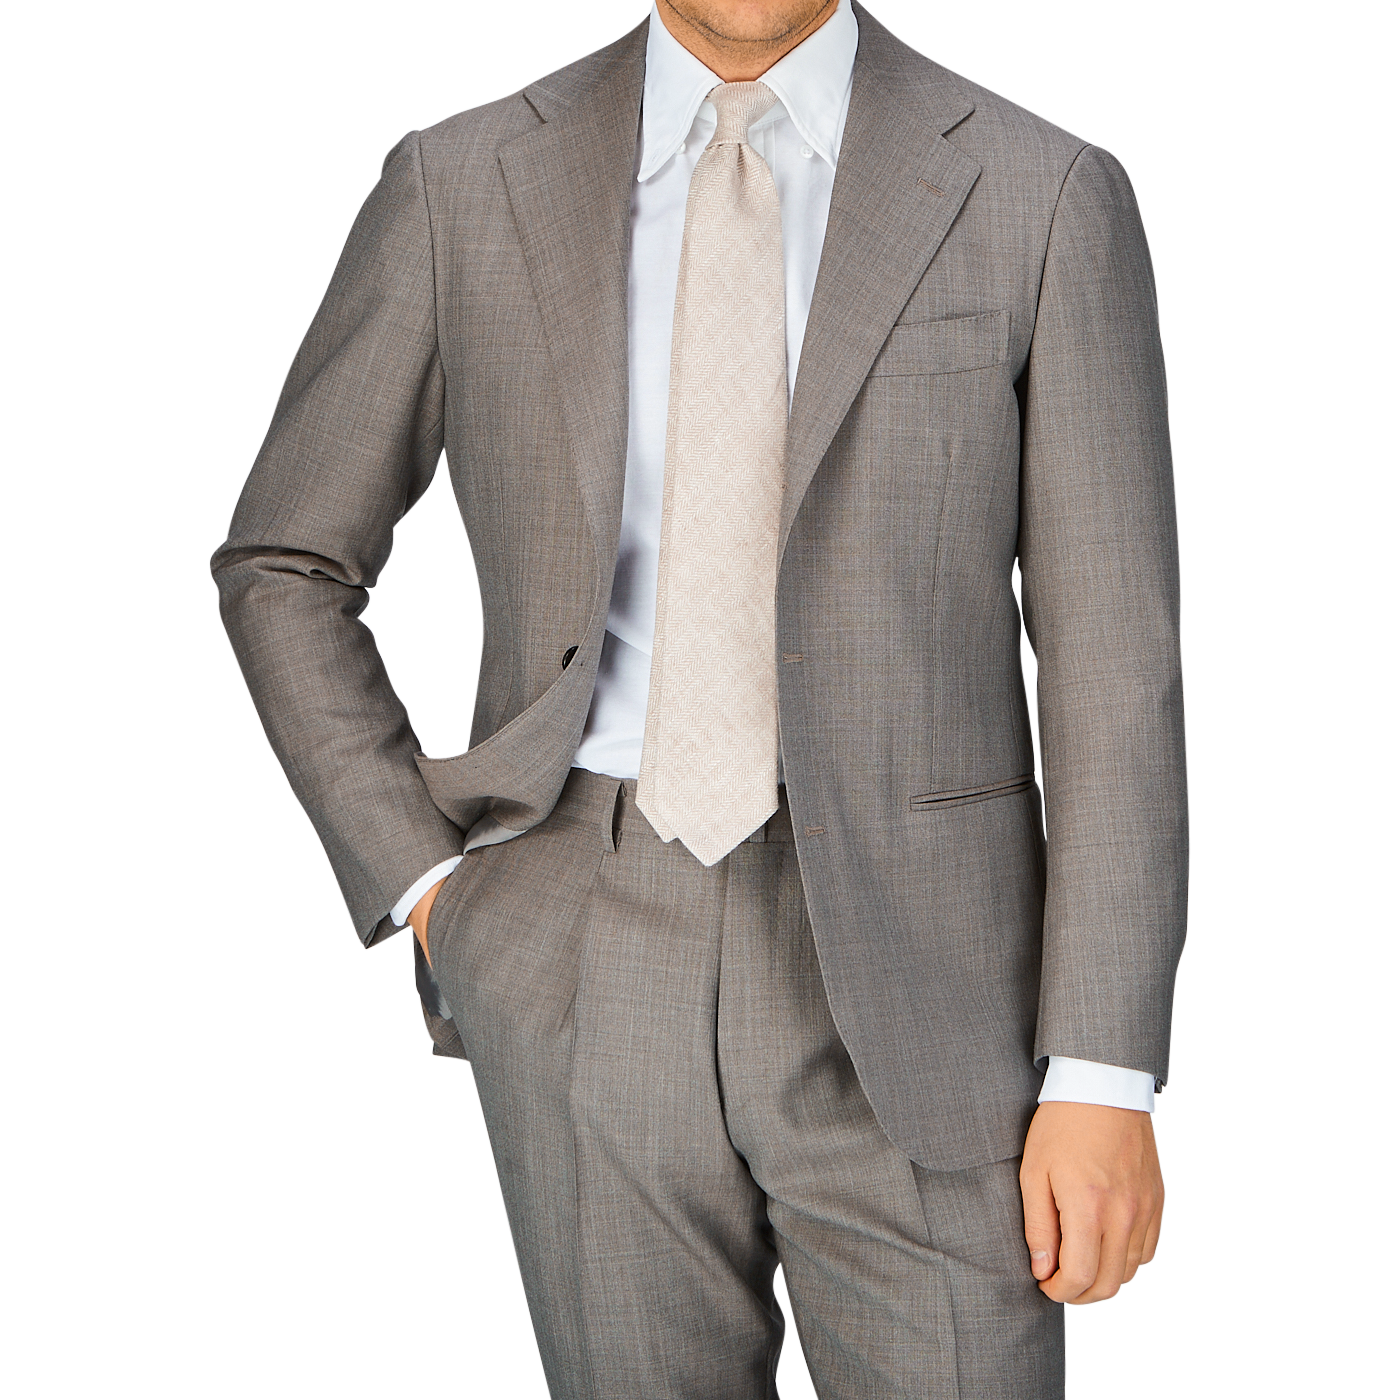 A man in a Ring Jacket Mid Grey High-Twist Wool Suit with his hand in his pocket.